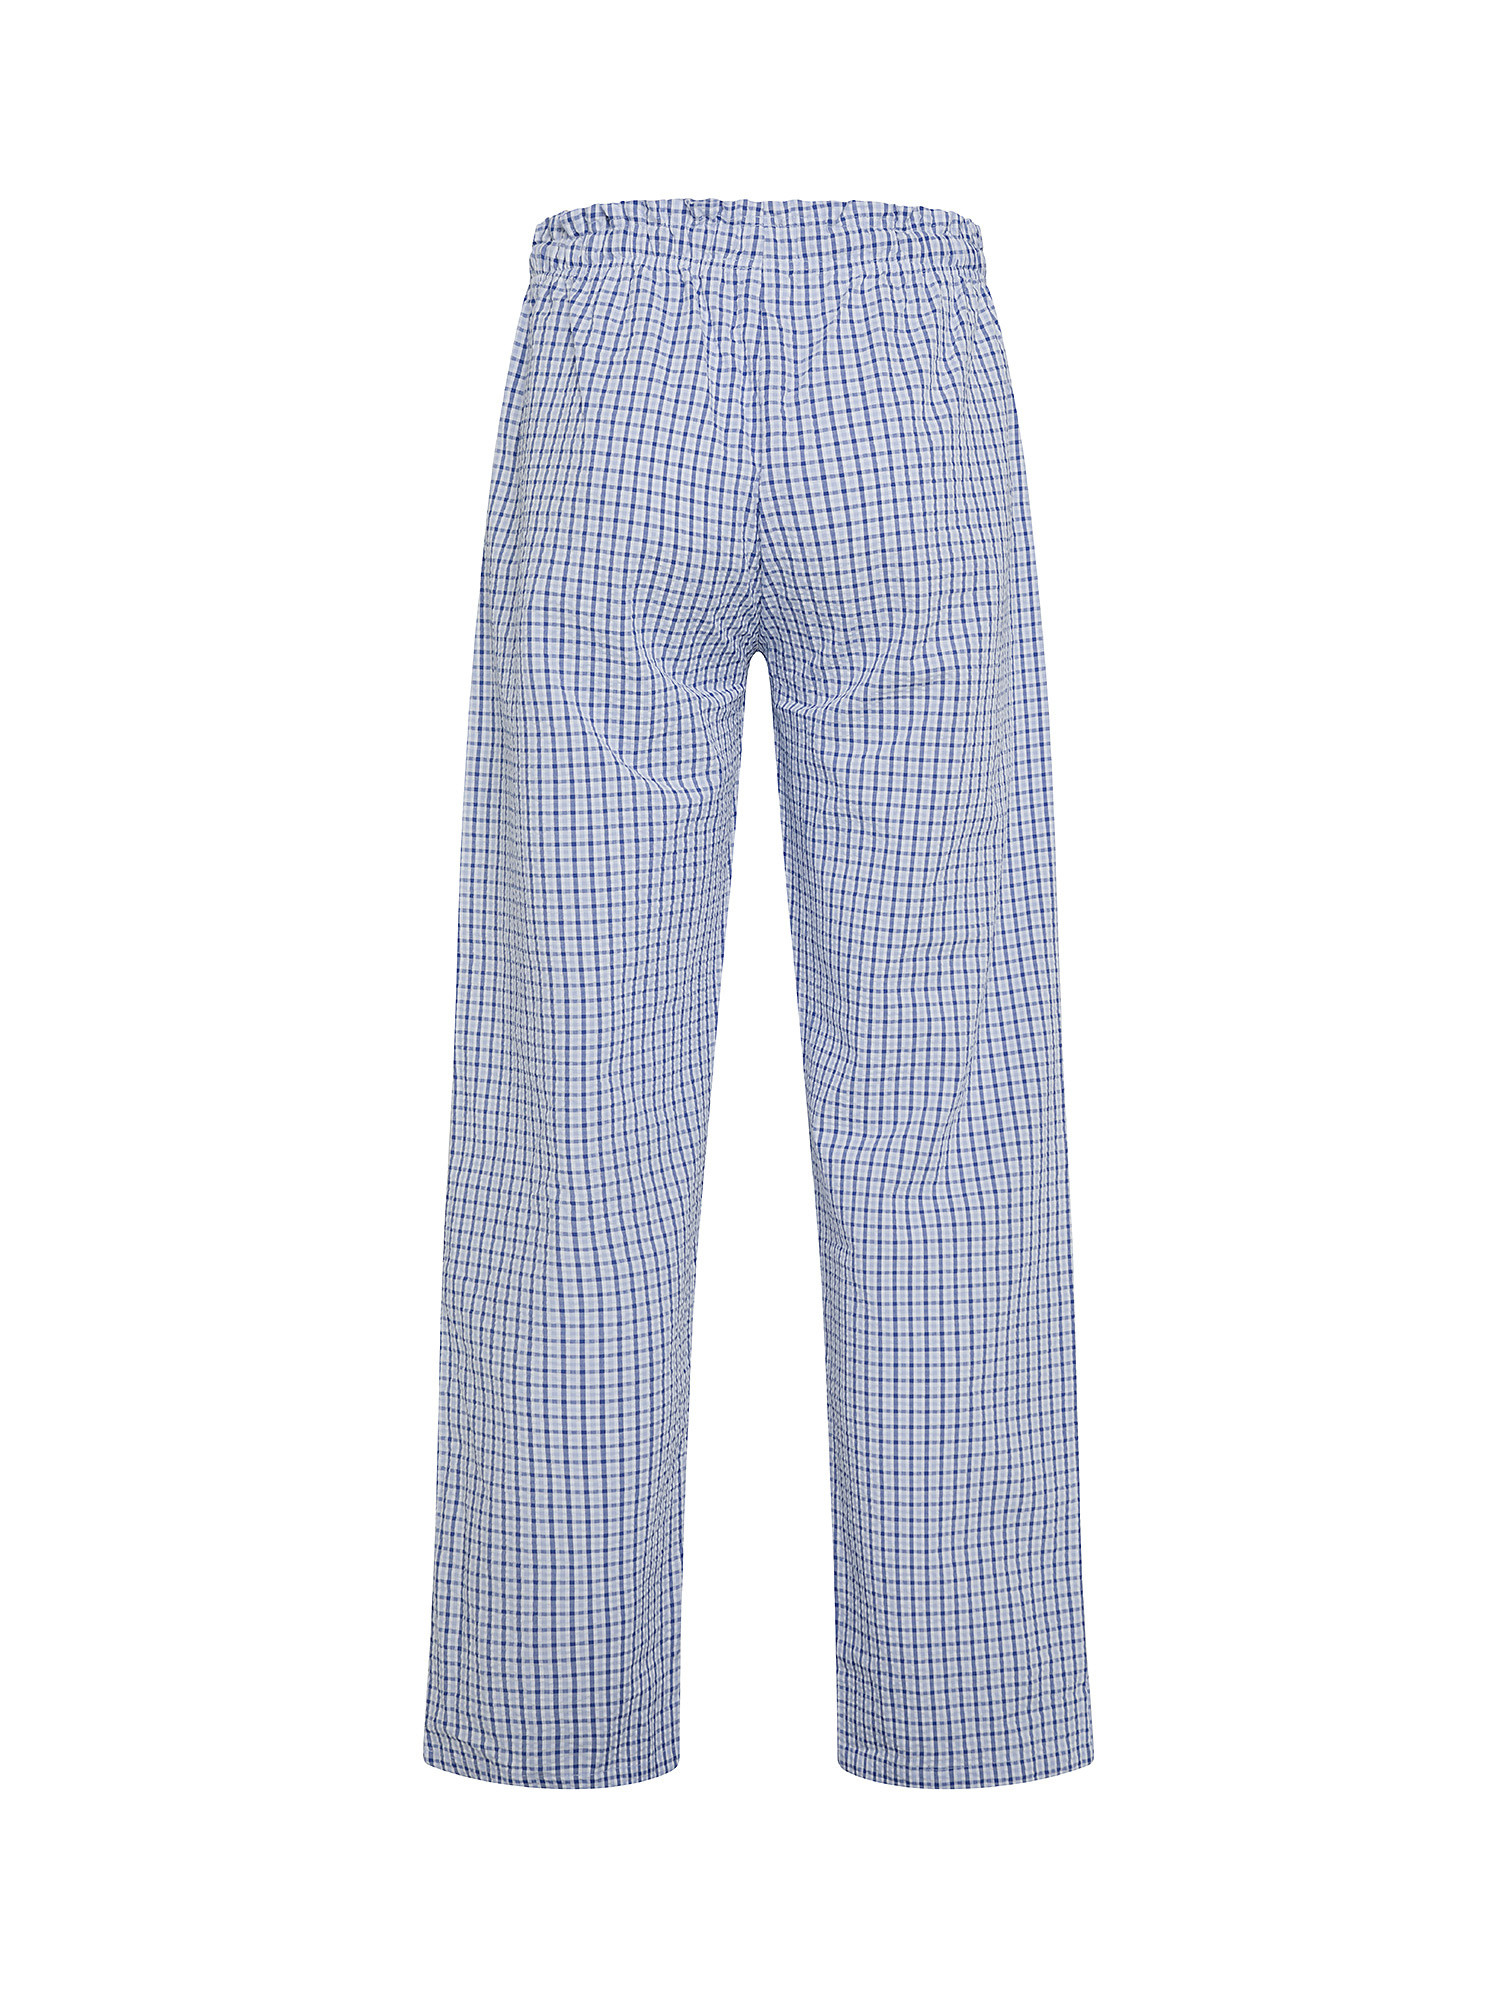 Seersucker check cotton trousers, Multicolor, large image number 1